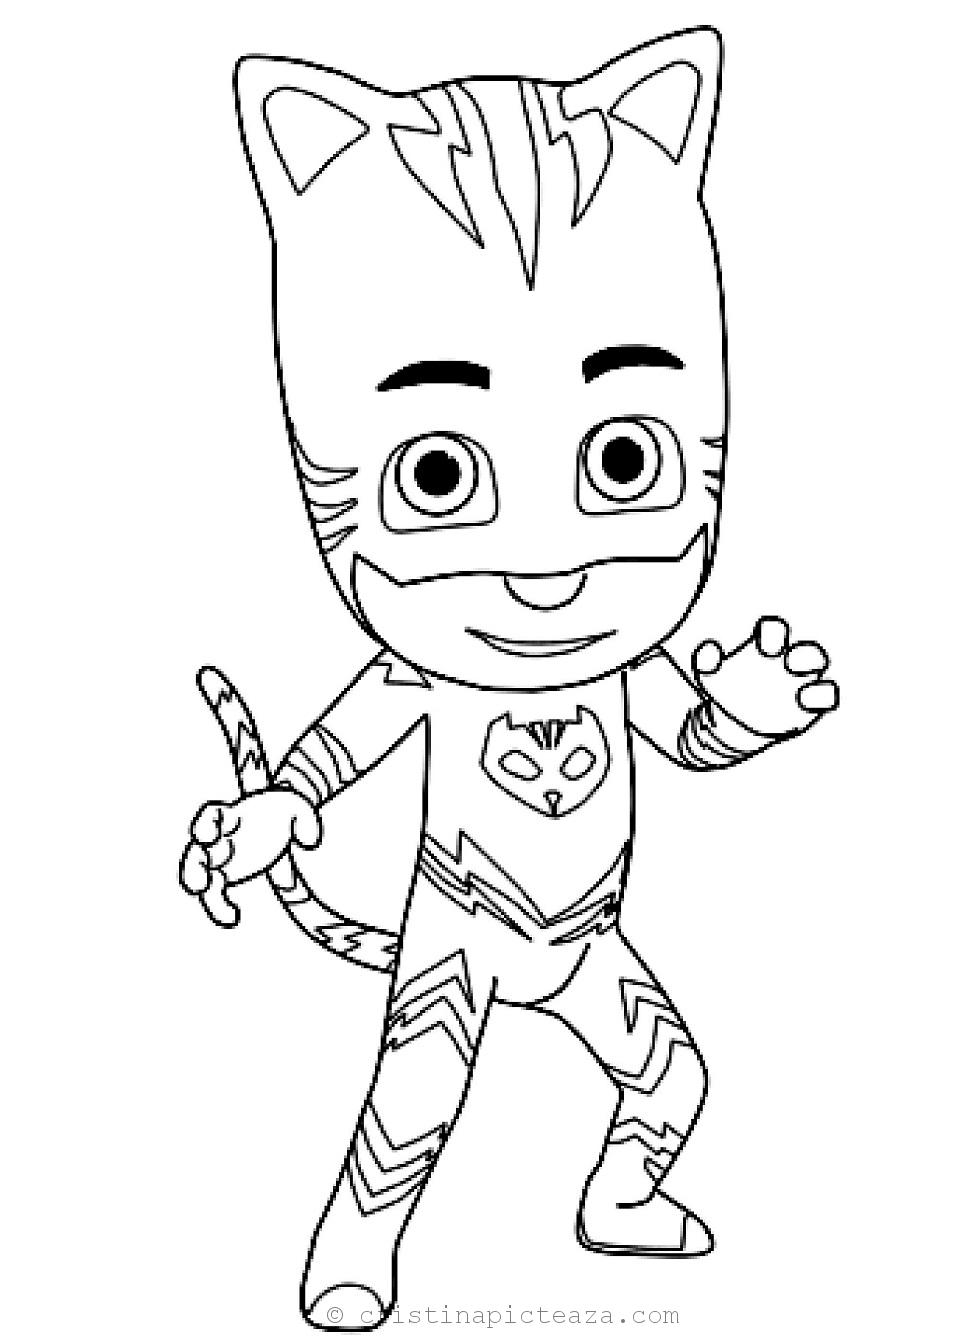 Pj Masks Coloring Pages Coloring Sheets With Your Heroes